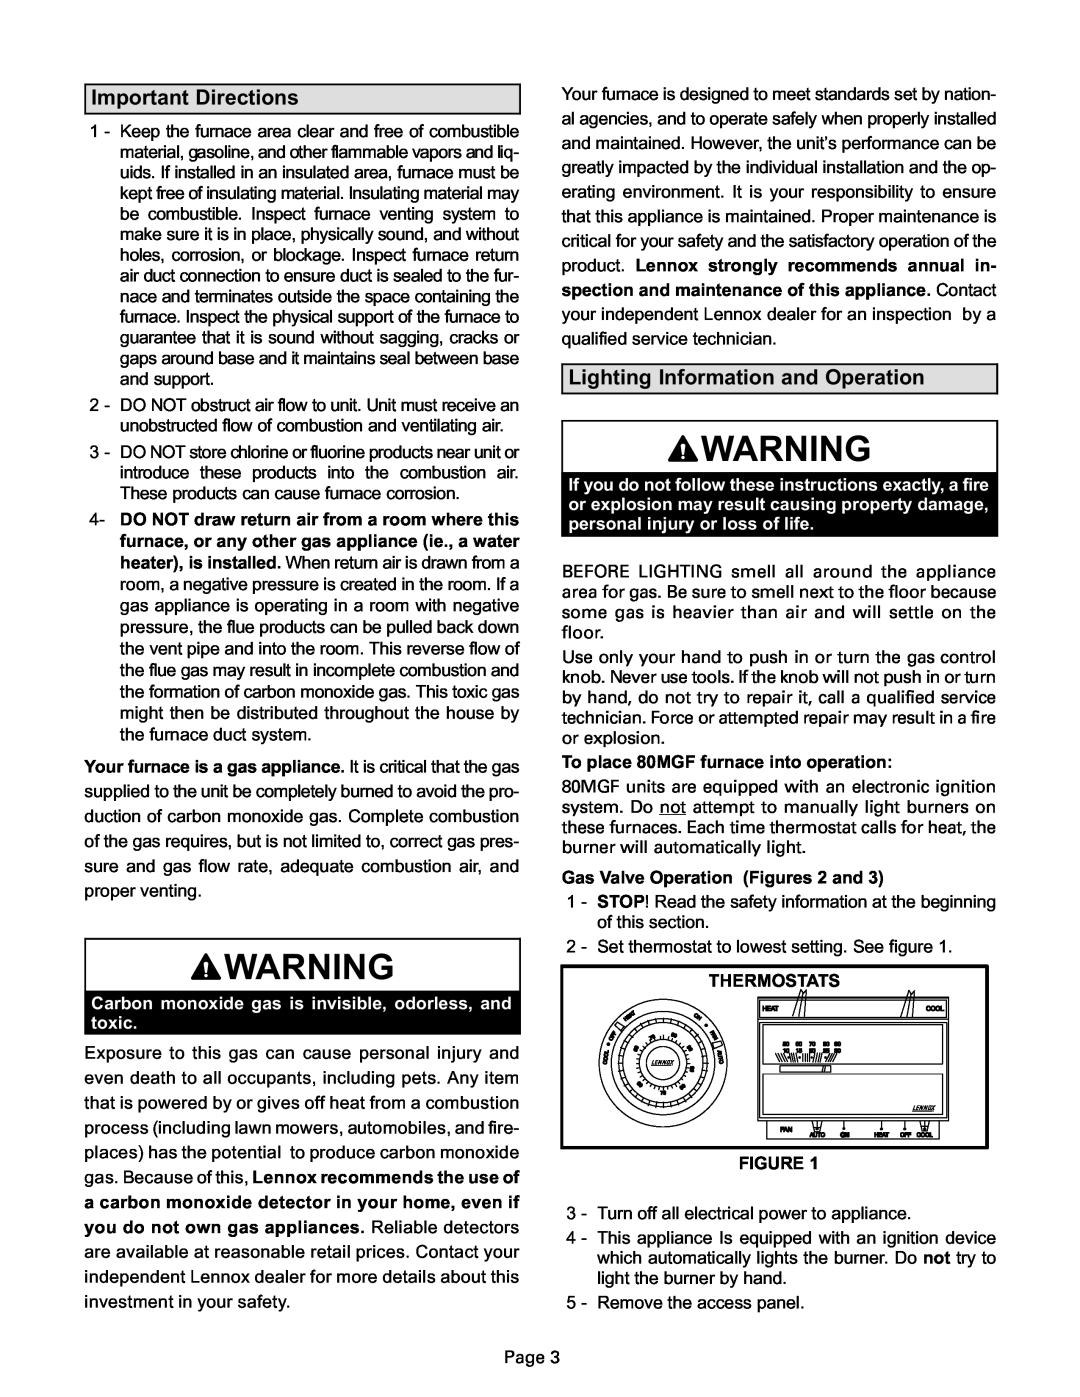 Lenoxx Electronics 80MGF manual Important Directions, Lighting Information and Operation 